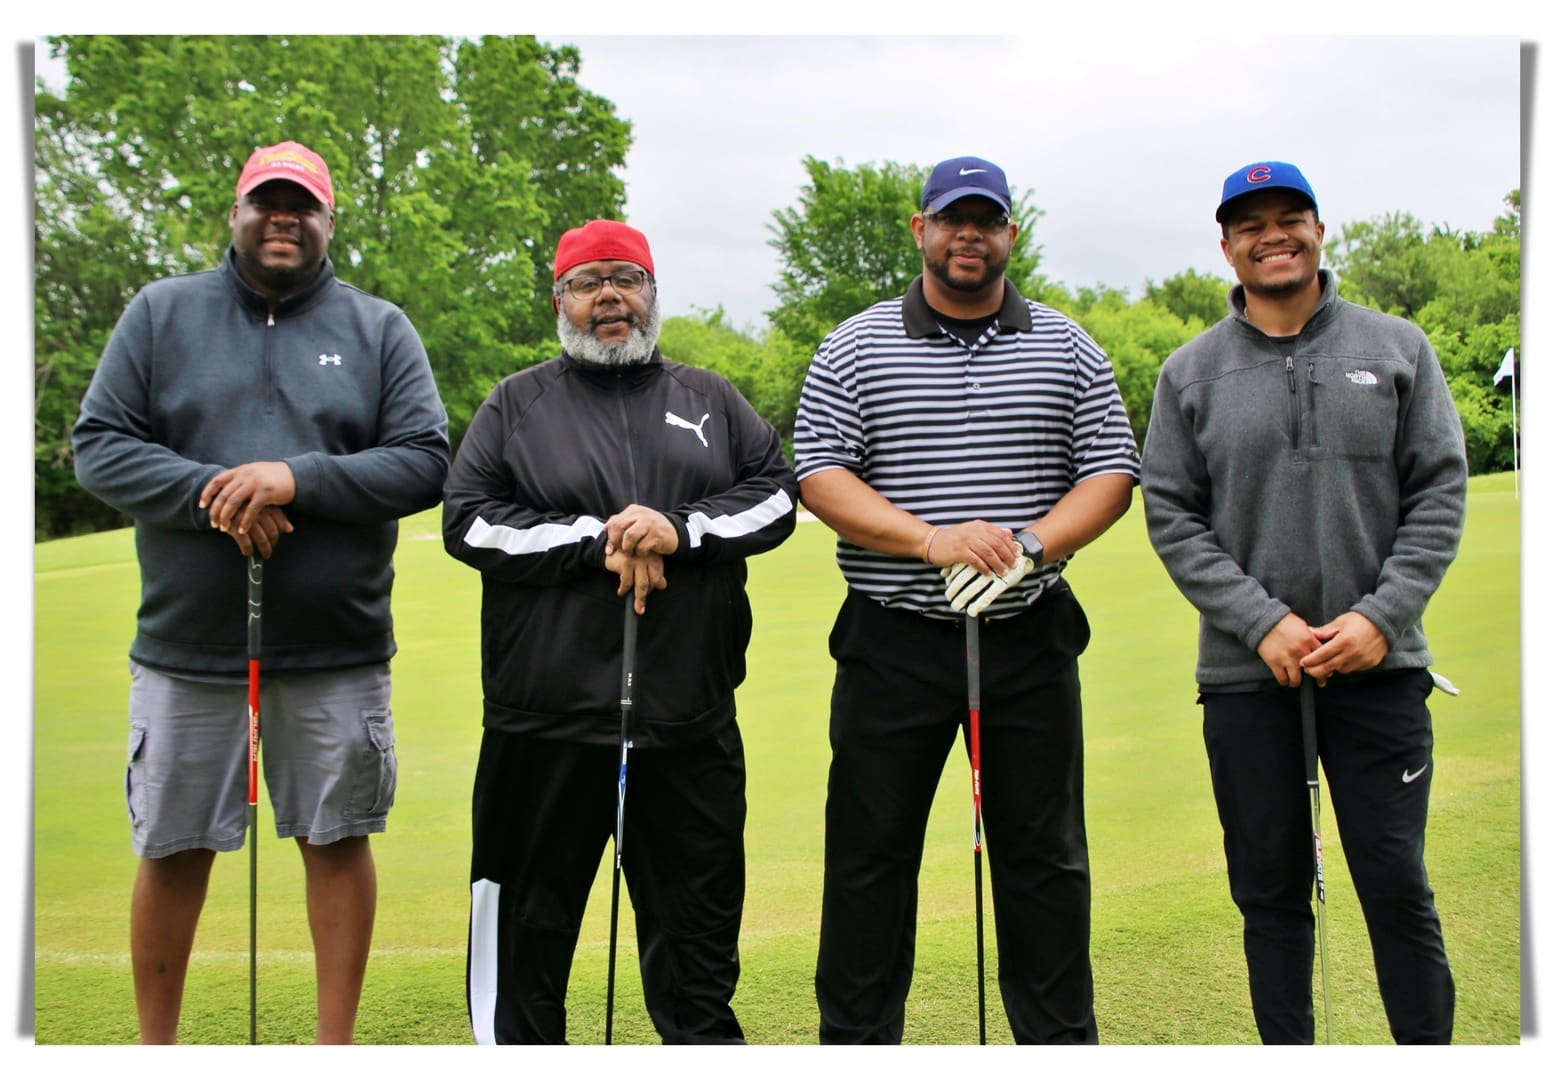 group photo of golfers wearing hats 2